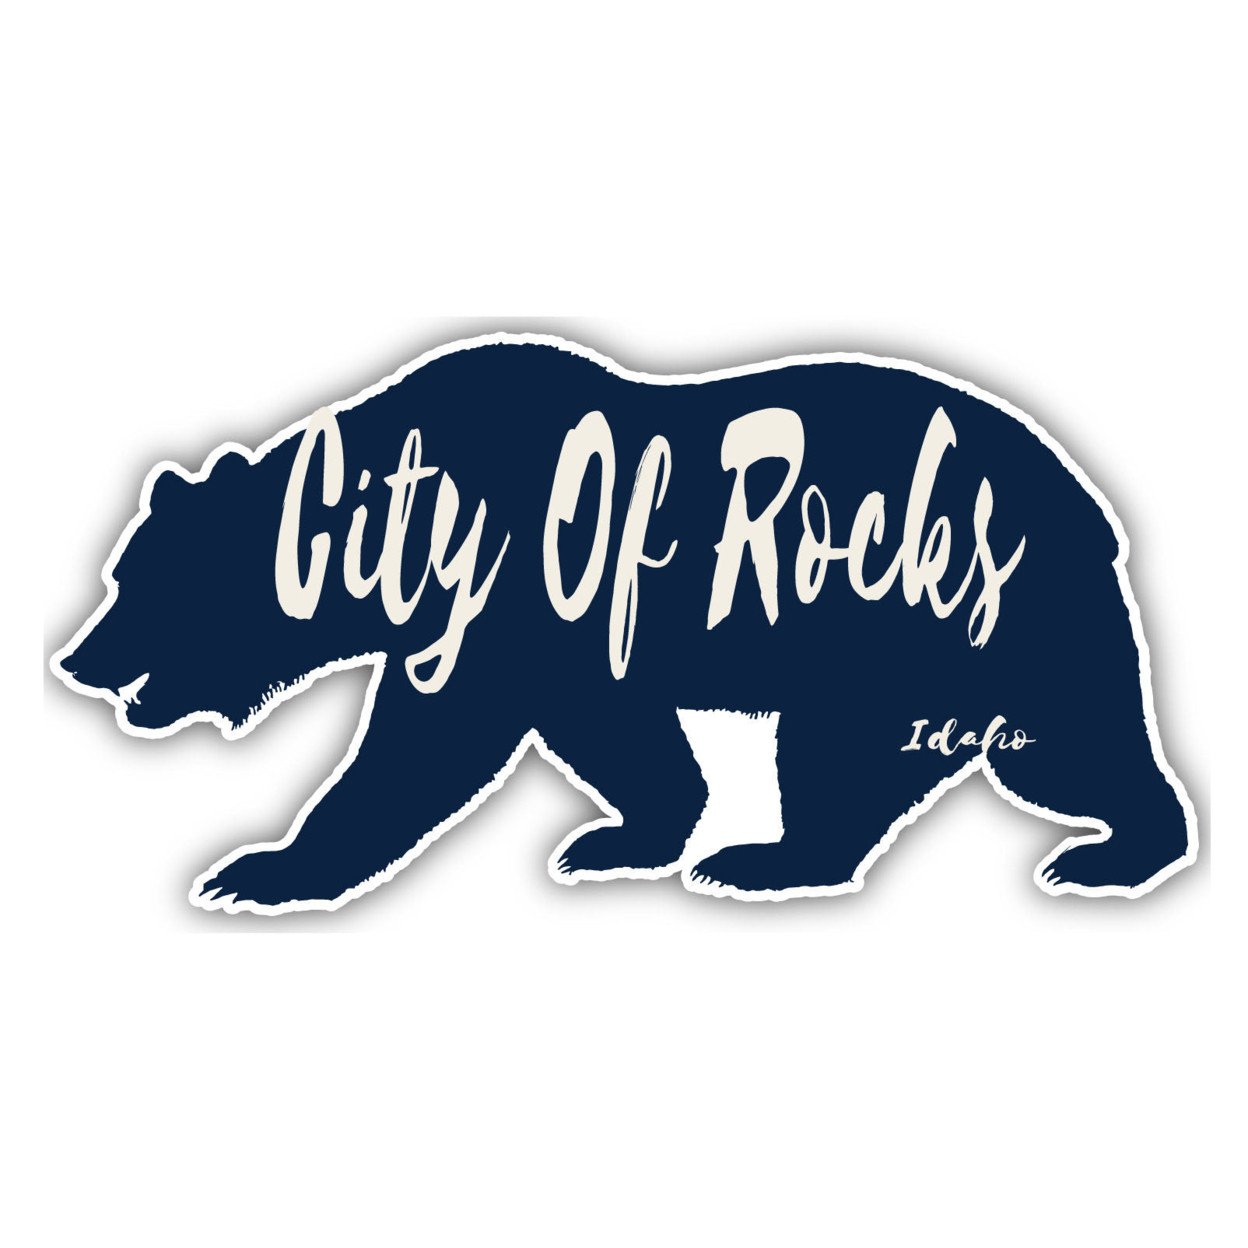 City Of Rocks Idaho Souvenir Decorative Stickers (Choose Theme And Size) - 4-Pack, 6-Inch, Camp Life